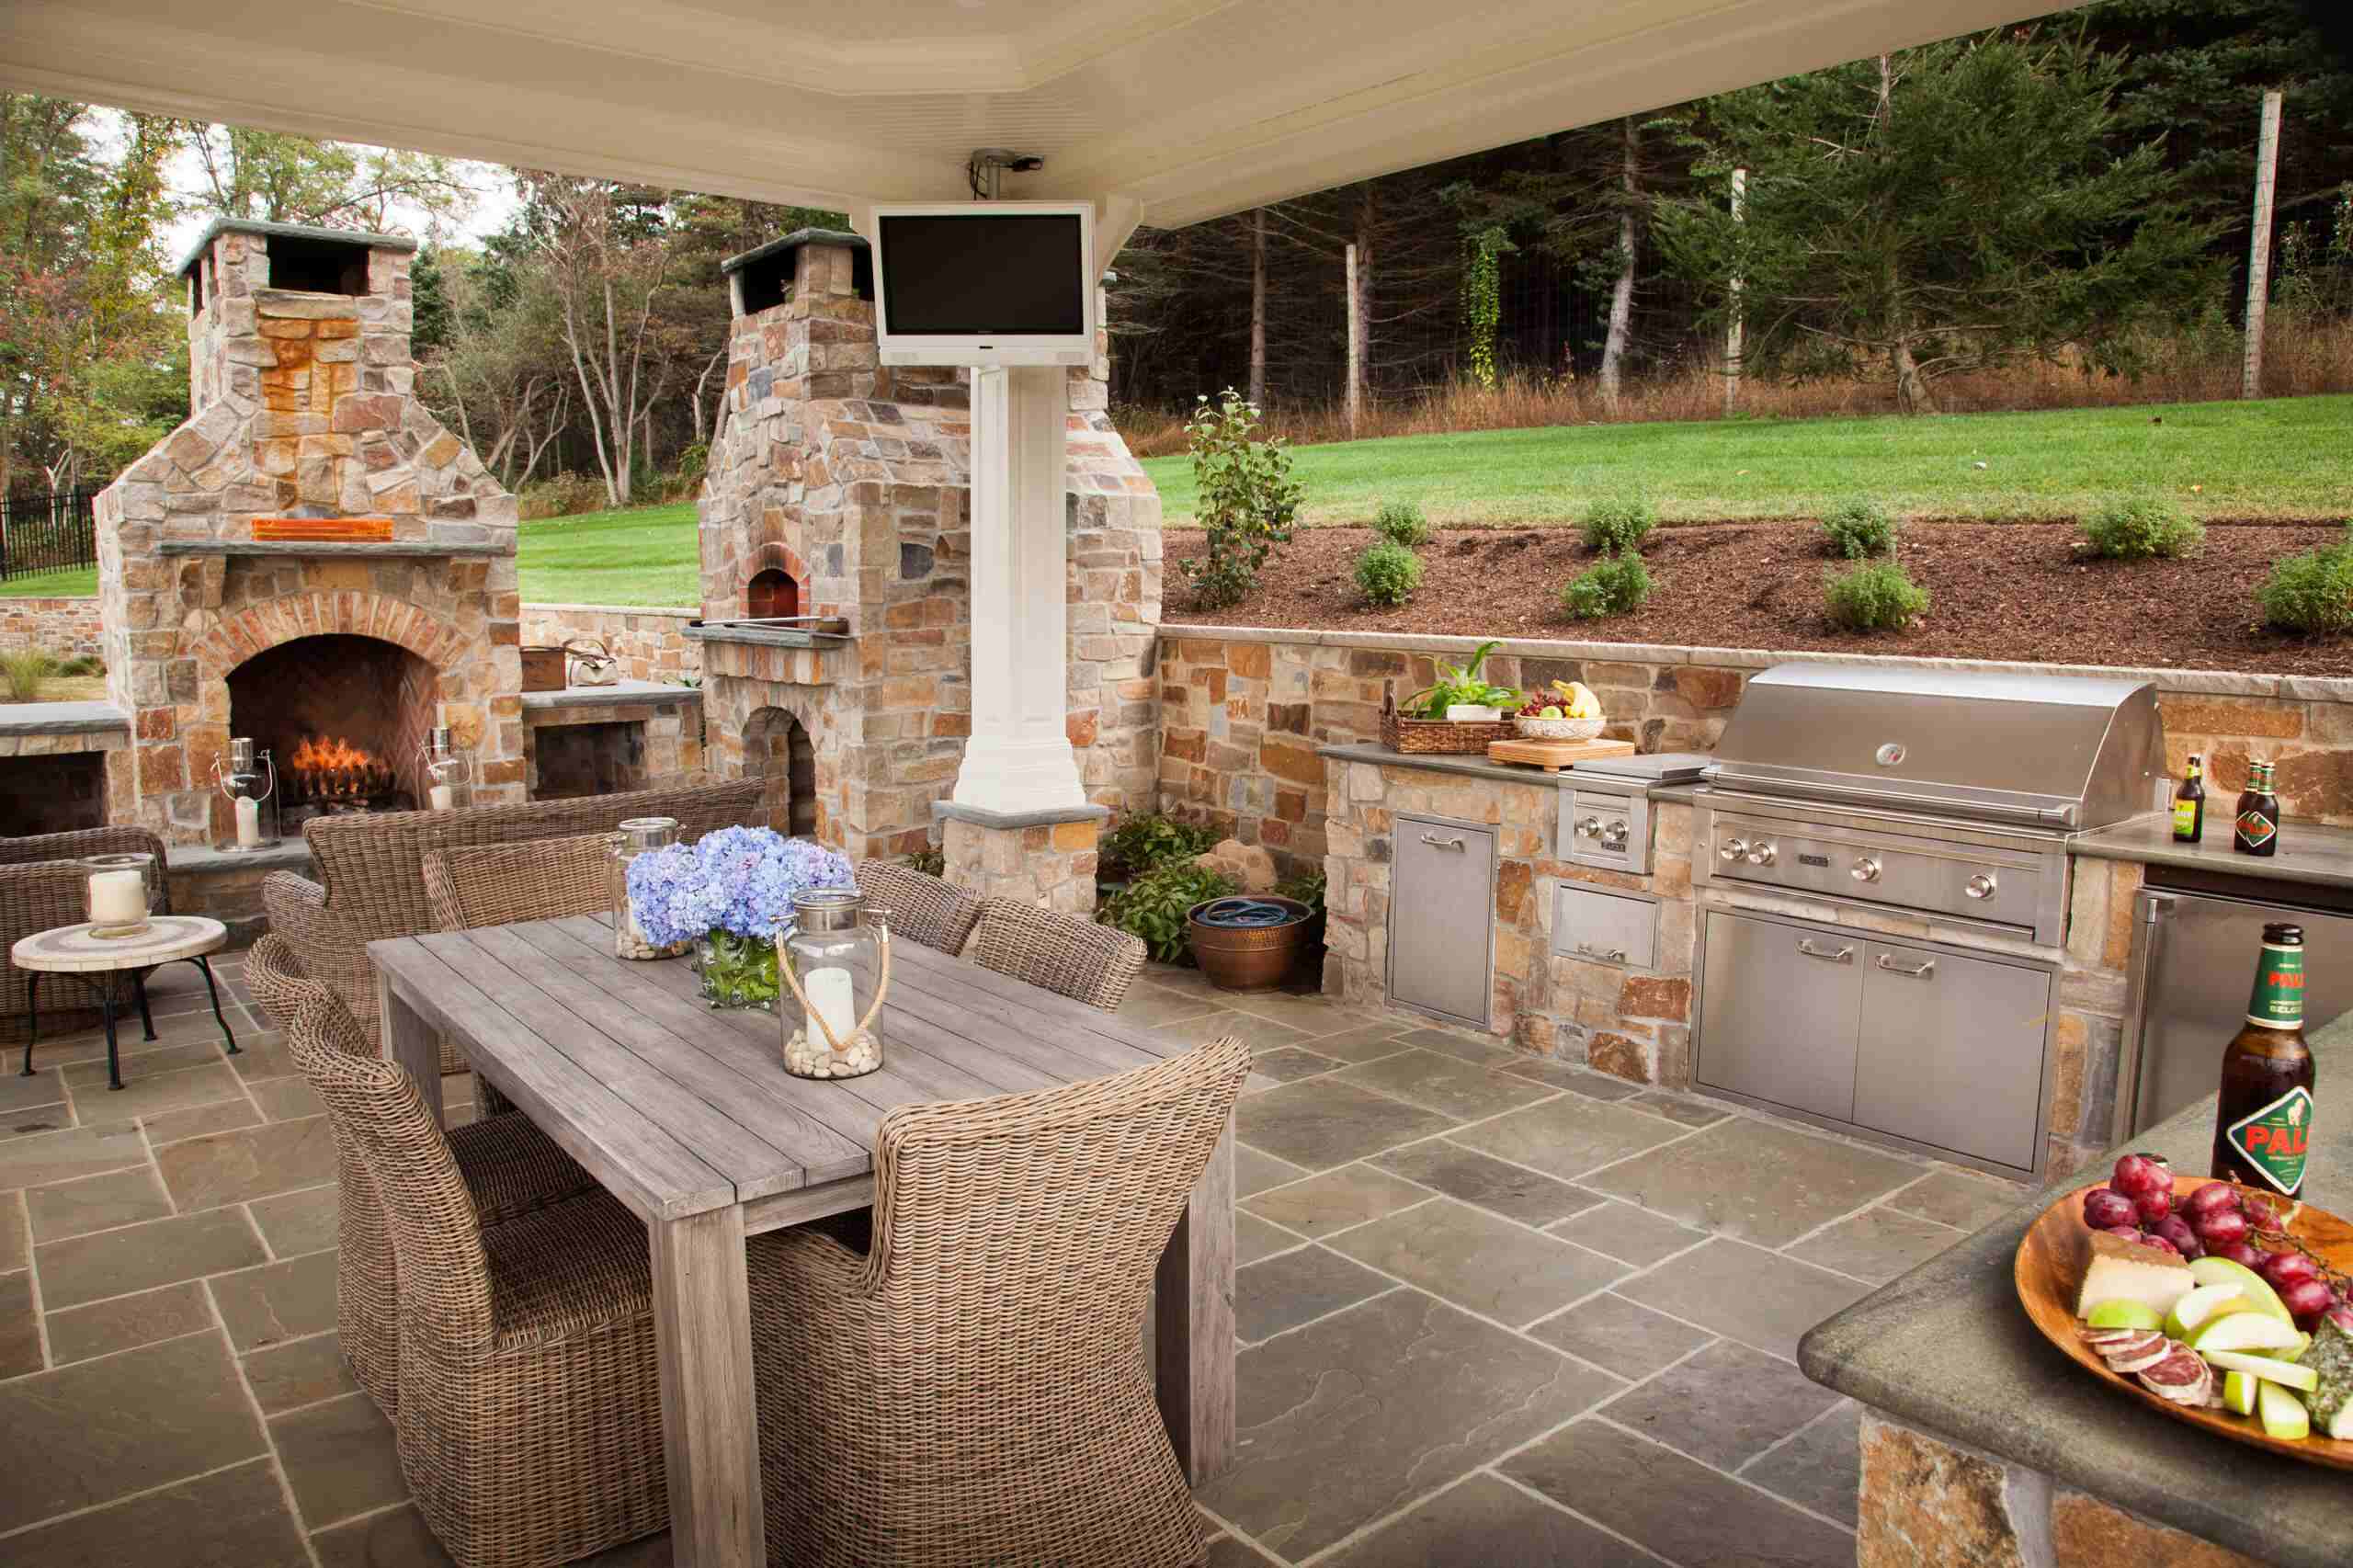 Where To Place Grill On Patio